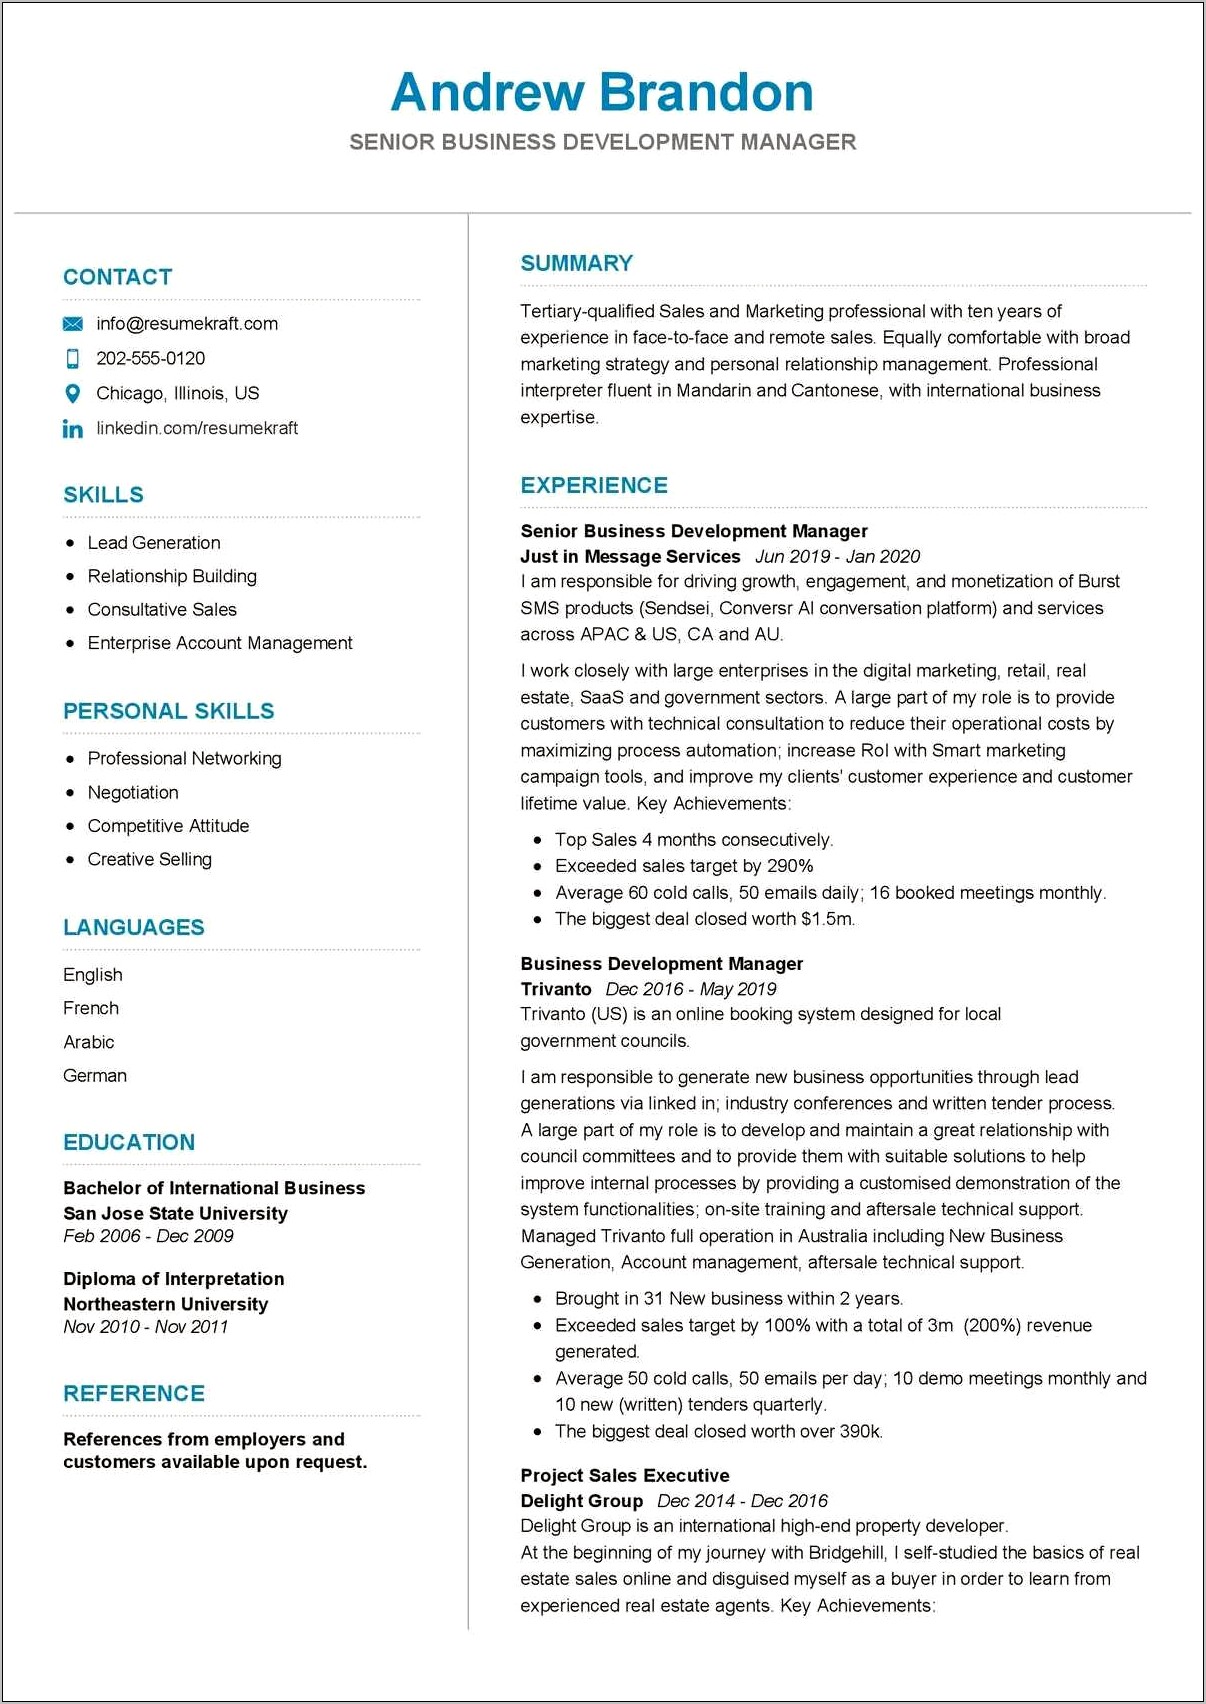 Example Of Business Development Manager Resume